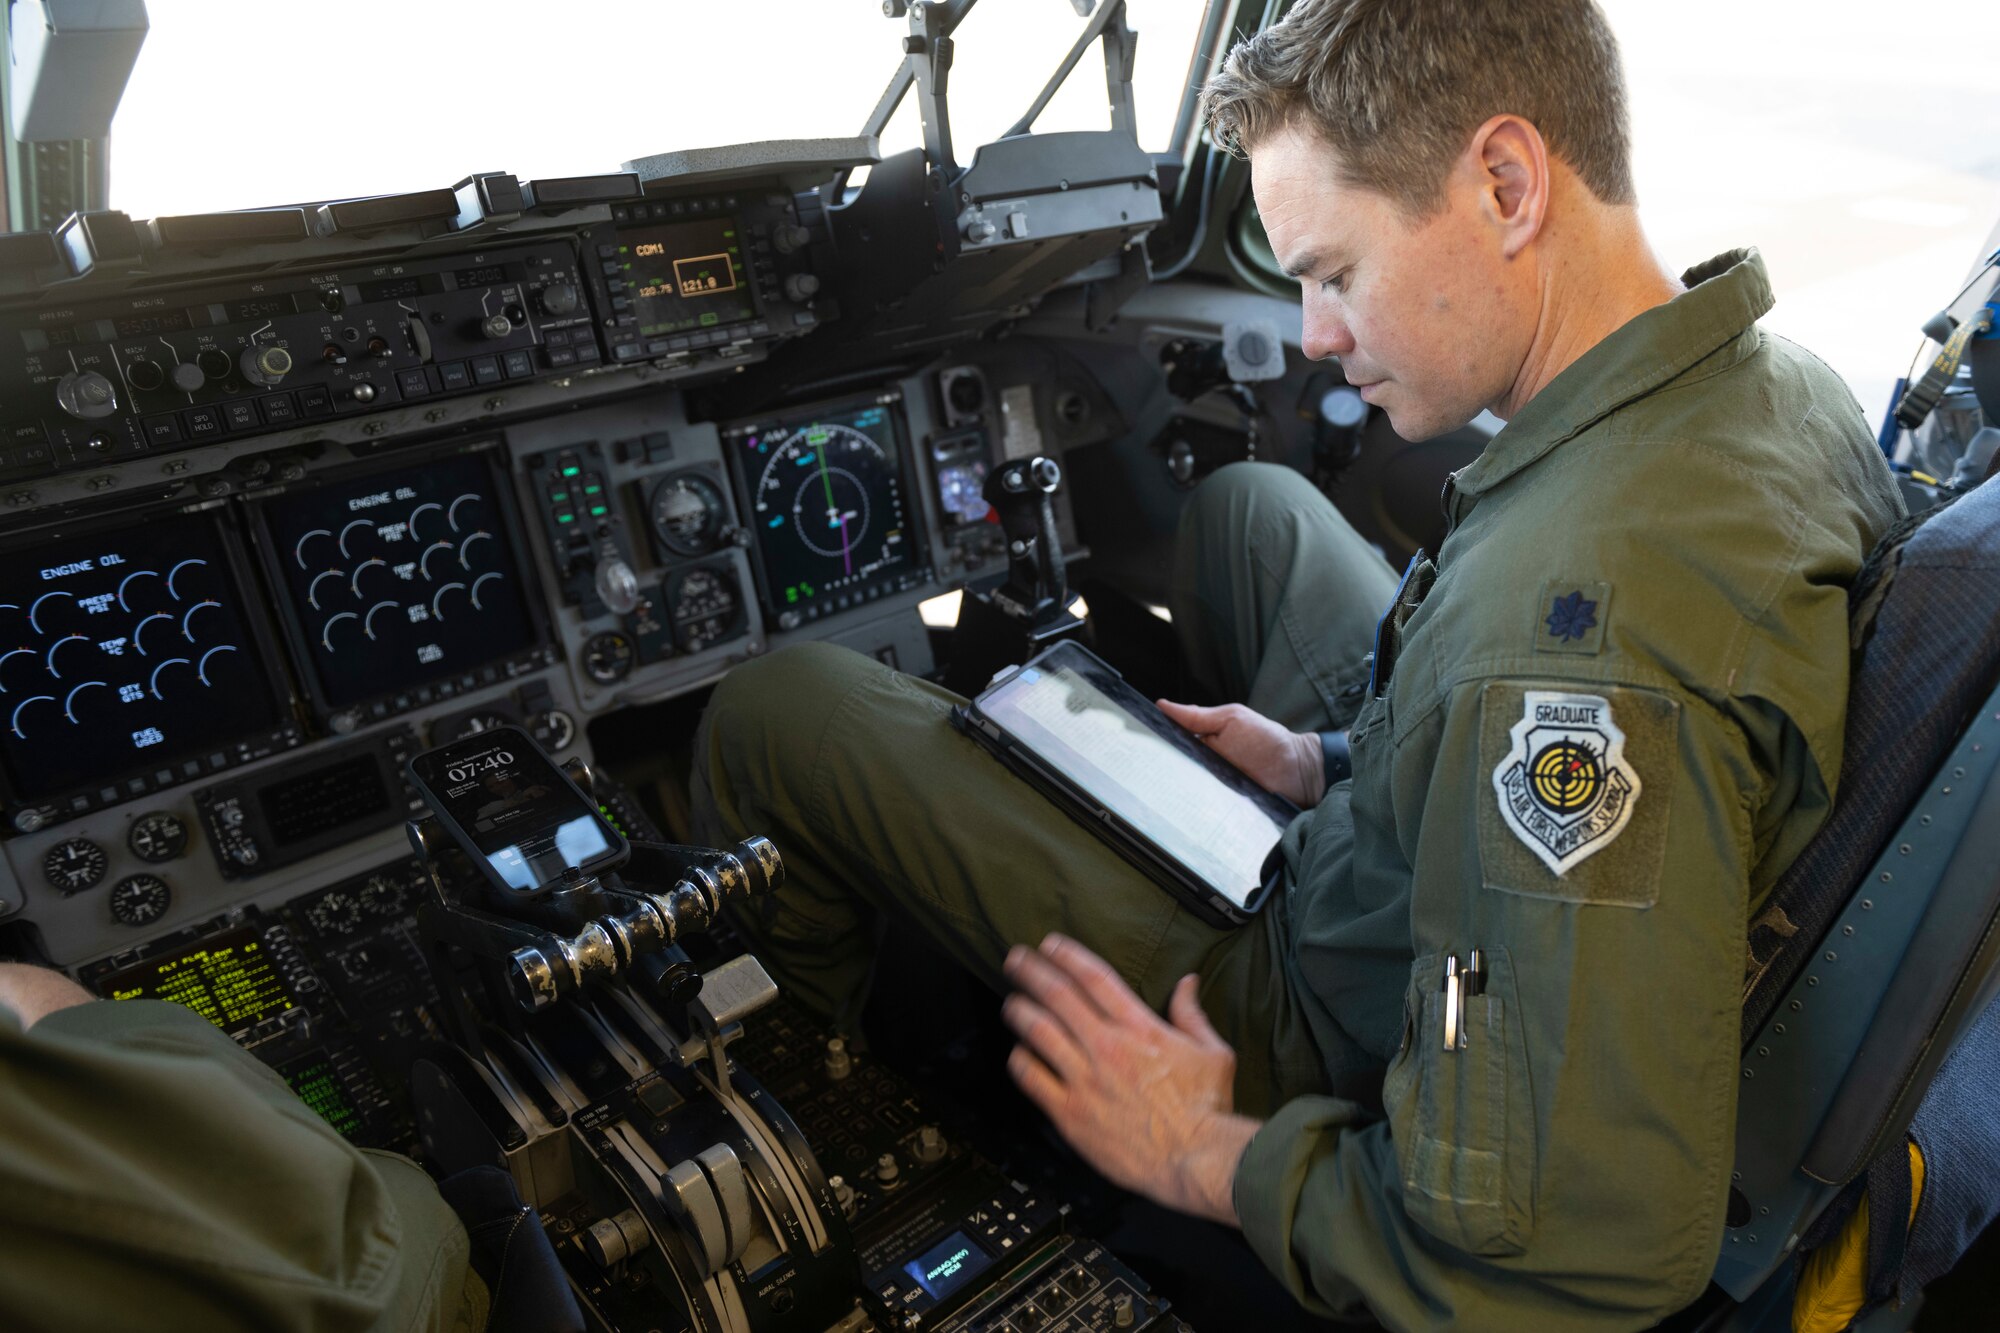 U.S. Air Force Lt. Col. Michael Talley, 301st Airlift Squadron pilot, conducts preflight operations at Travis Air Force Base, California, Sept. 23, 2022. A Reserve aircrew from the 301st AS performed a three-day mission Sept. 23 – 25, to move humanitarian cargo to Haiti. Through the Denton Program, three school buses donated from San Diego Unified School District were transported from March Air Reserve Base, California, to Haiti. (U.S. Air Force photo by Senior Airman Jonathon Carnell)